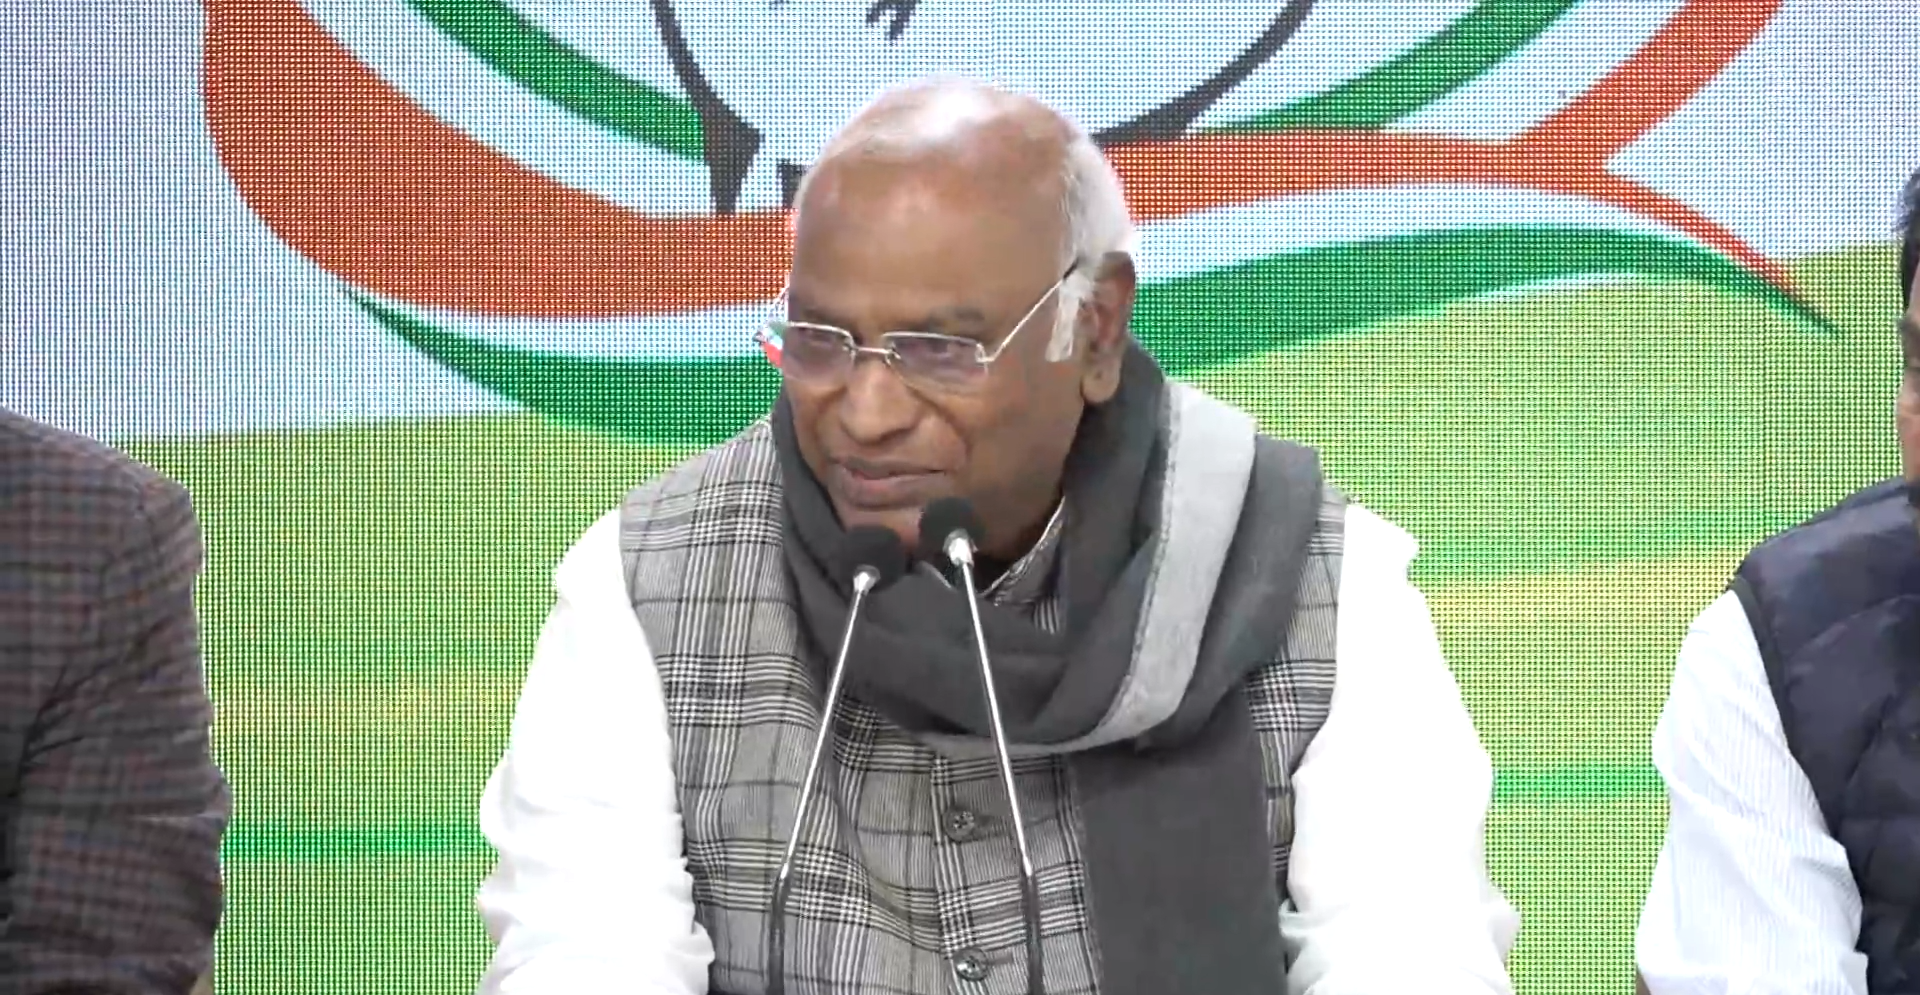 Congress President Kharge terms removal of questions related on Adani as undemocratic